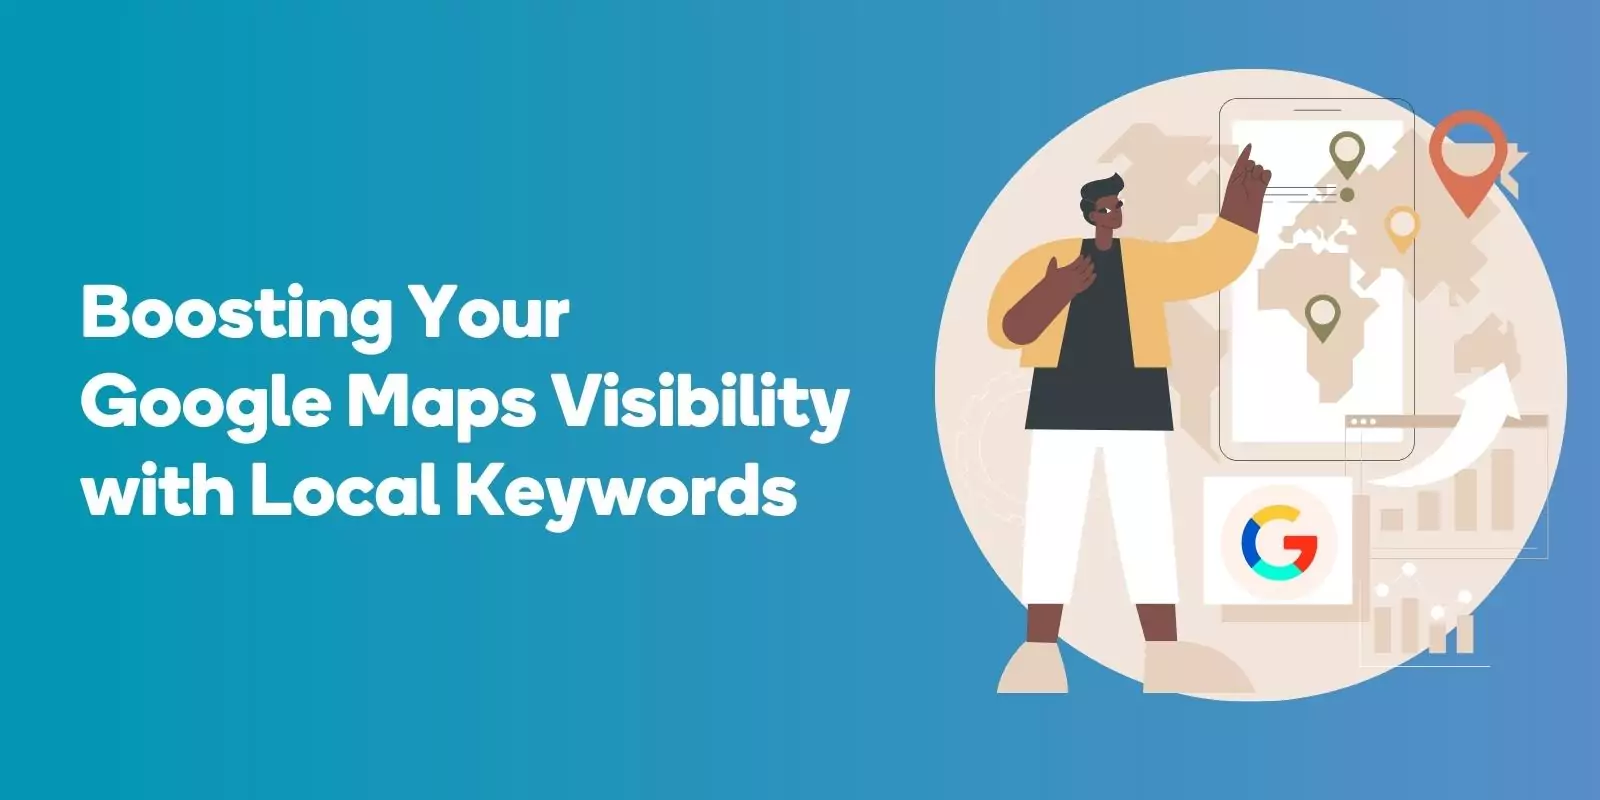 Boosting Your Google Maps Visibility with Local Keywords